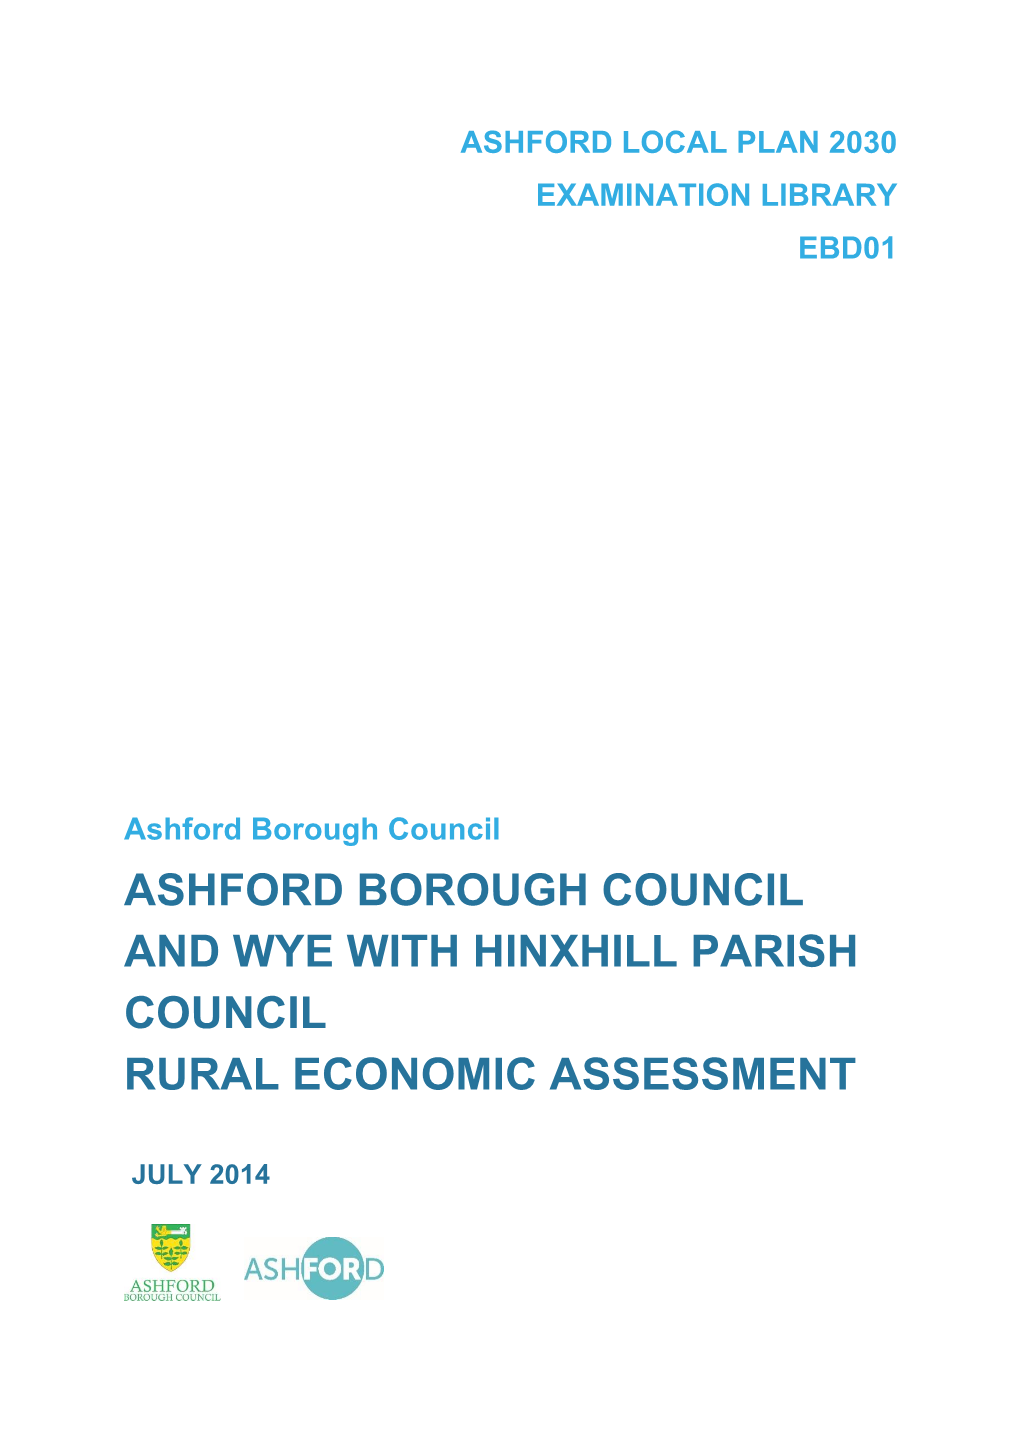 Ashford Borough Council and Wye with Hinxhill Parish Council Rural Economic Assessment